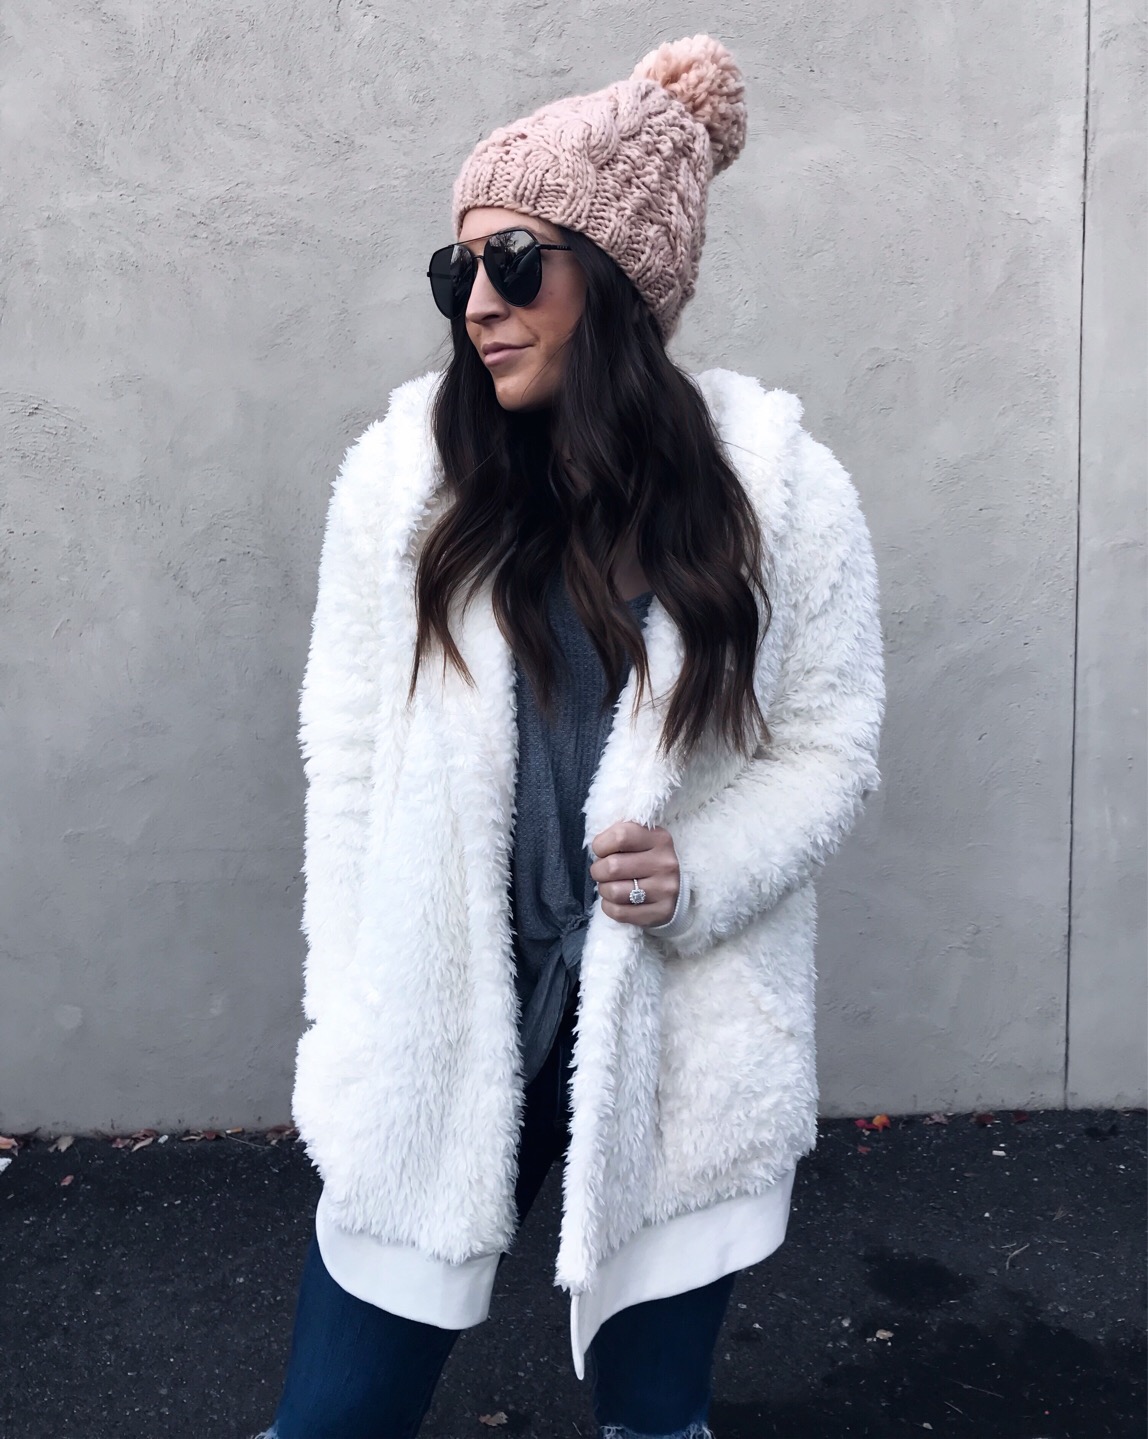 INSTAGRAM OUTFITS ROUND UP: BRACING FOR WINTER - NotJessFashion